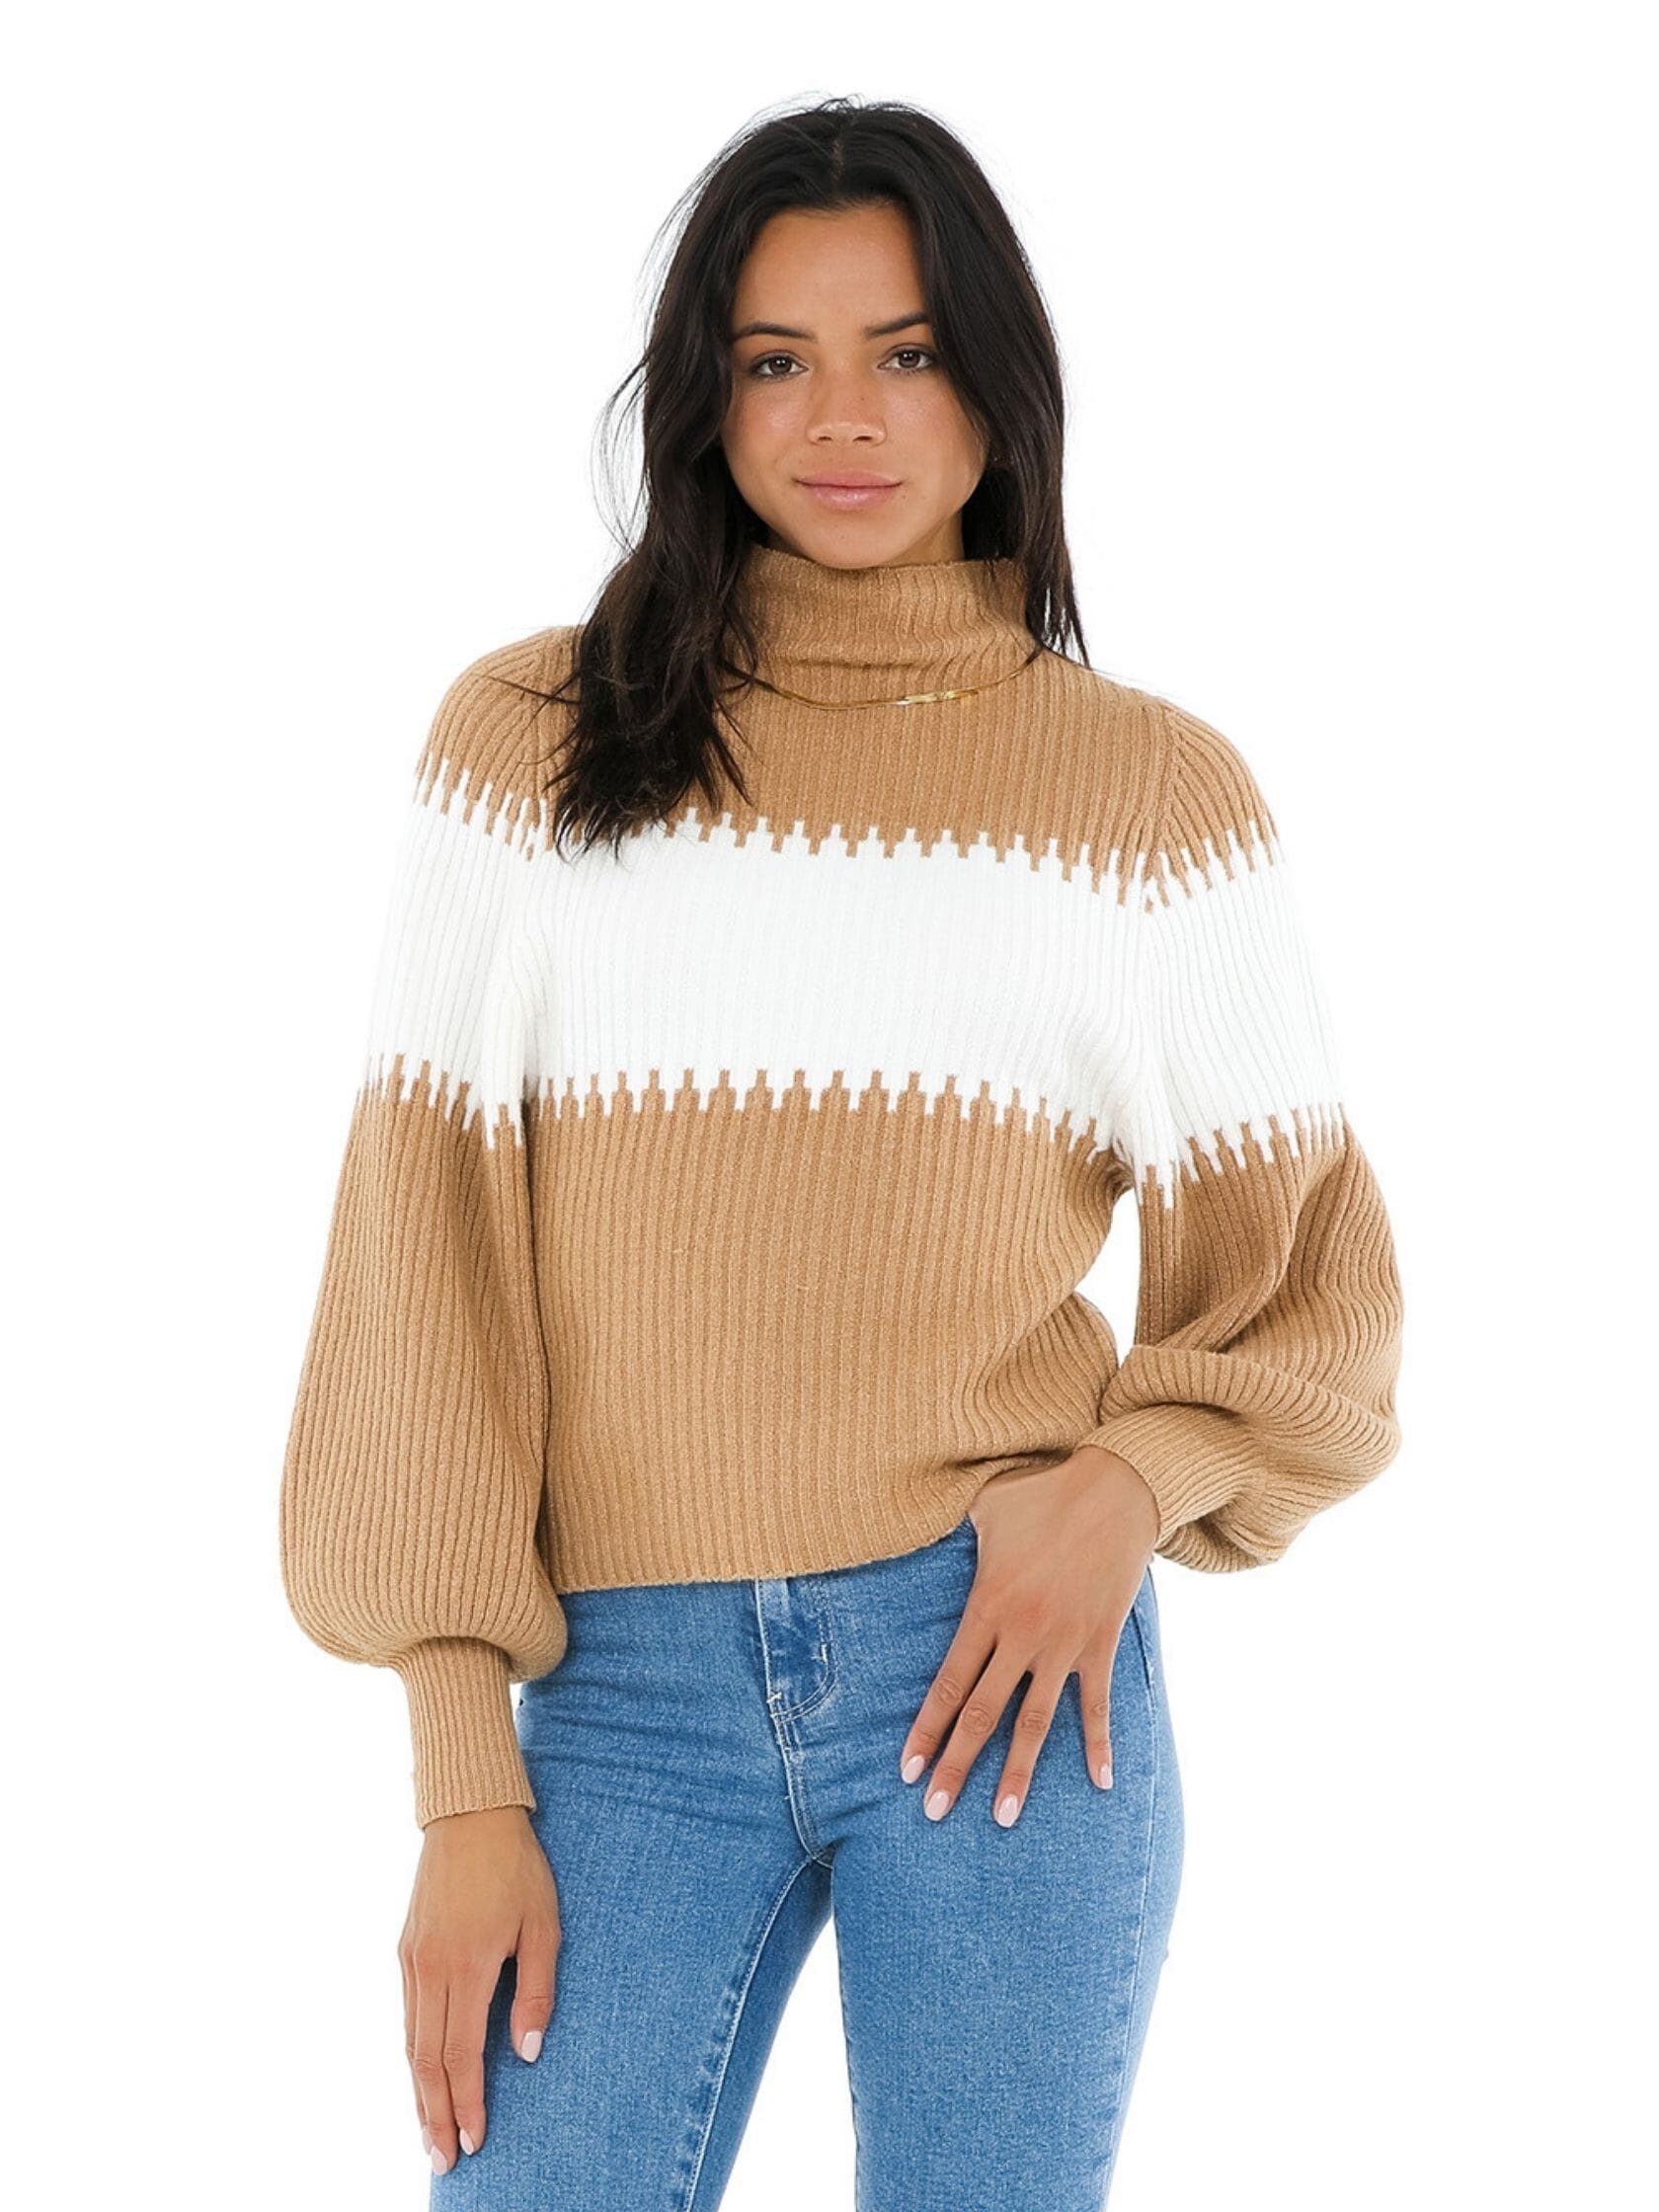 French Connection Sofia Knits Balloon Sleeve Jumper in Camel/White